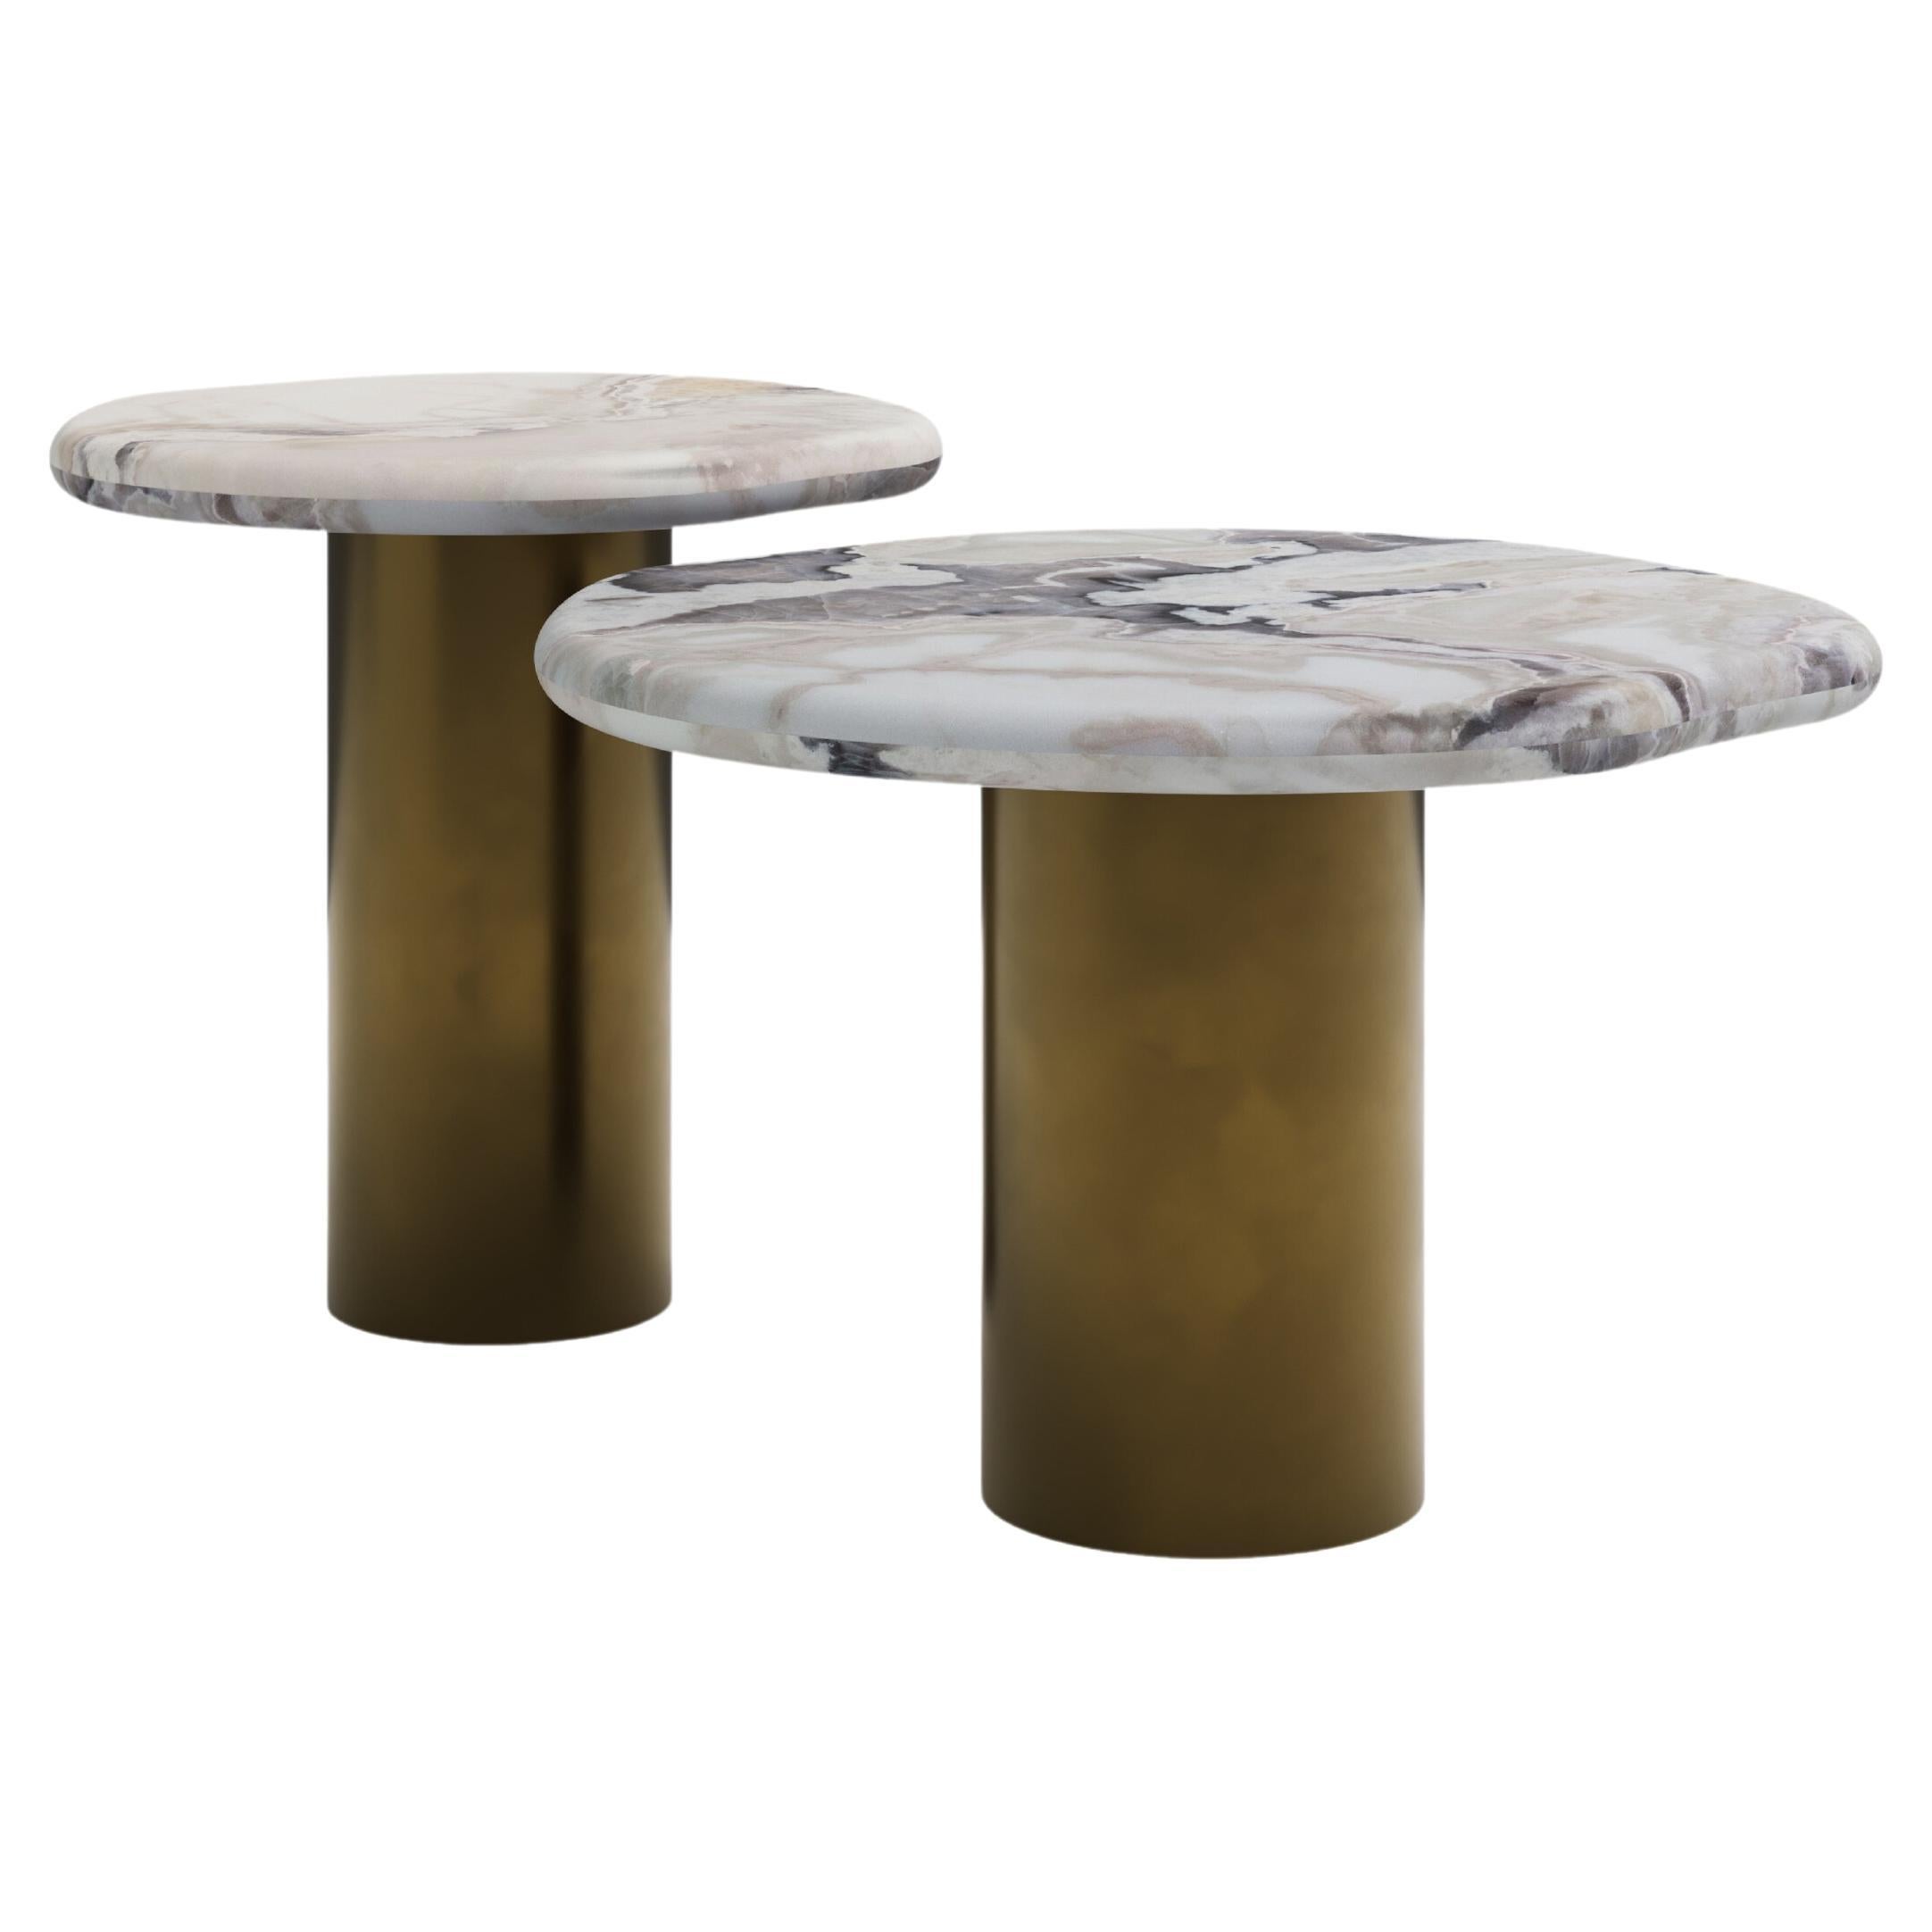 FORM(LA) Lago Round Side Table 18”L x 18”W x 18”H Oyster Marble & Antique Bronze For Sale